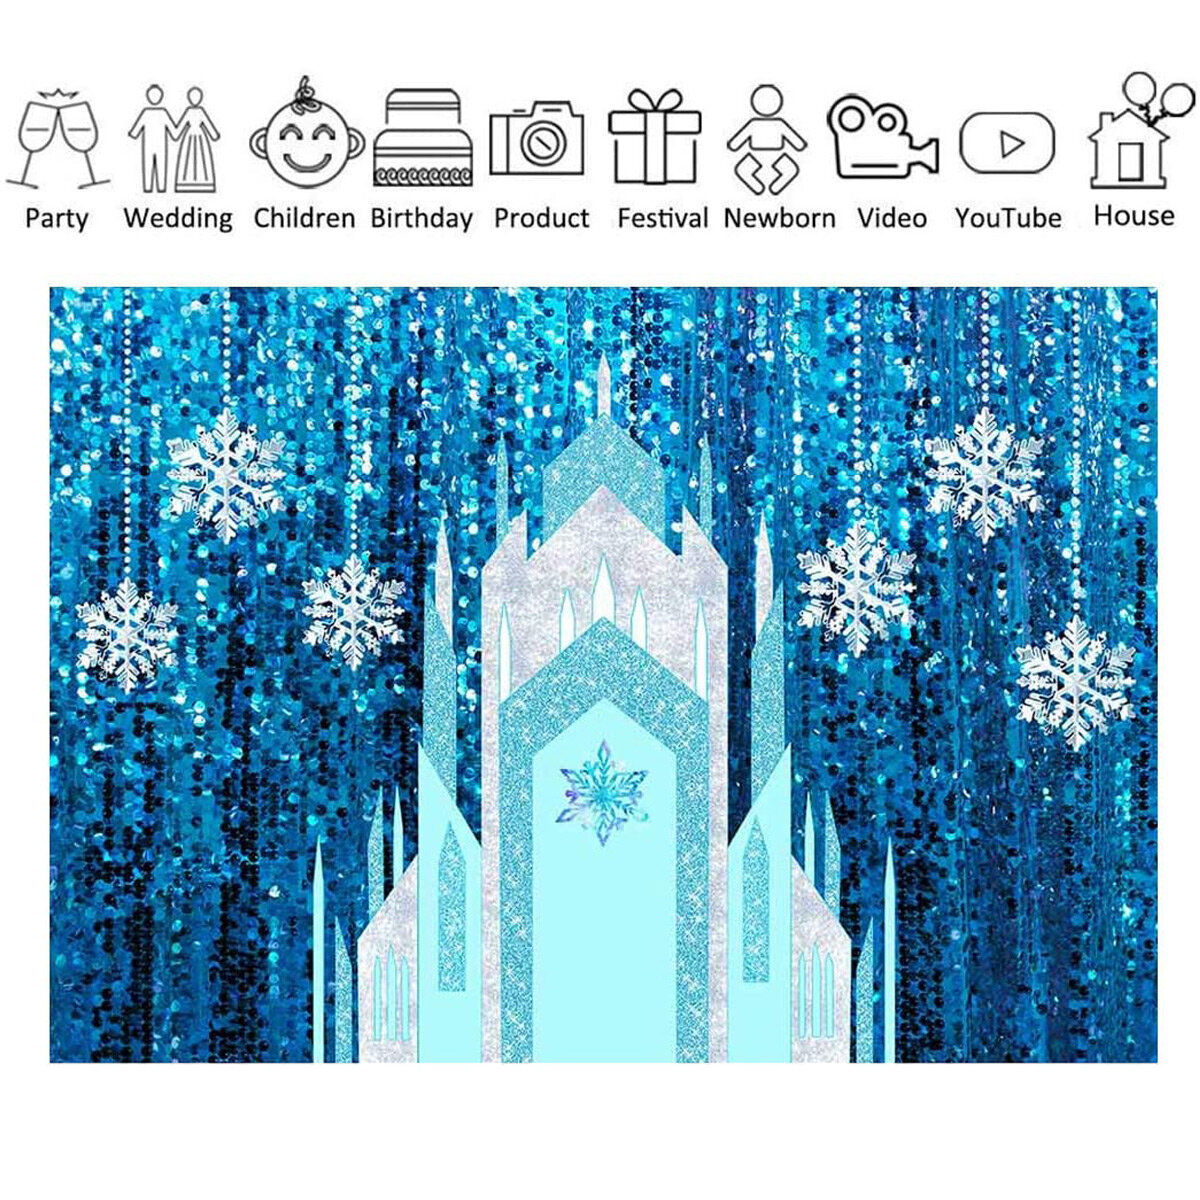 8x6ft 7x5ft 5x3ft Vinyl Cloth Romantic Ice Castle Photography Background Studio Photo Props Backdrop for Wedding Birthday Party COD